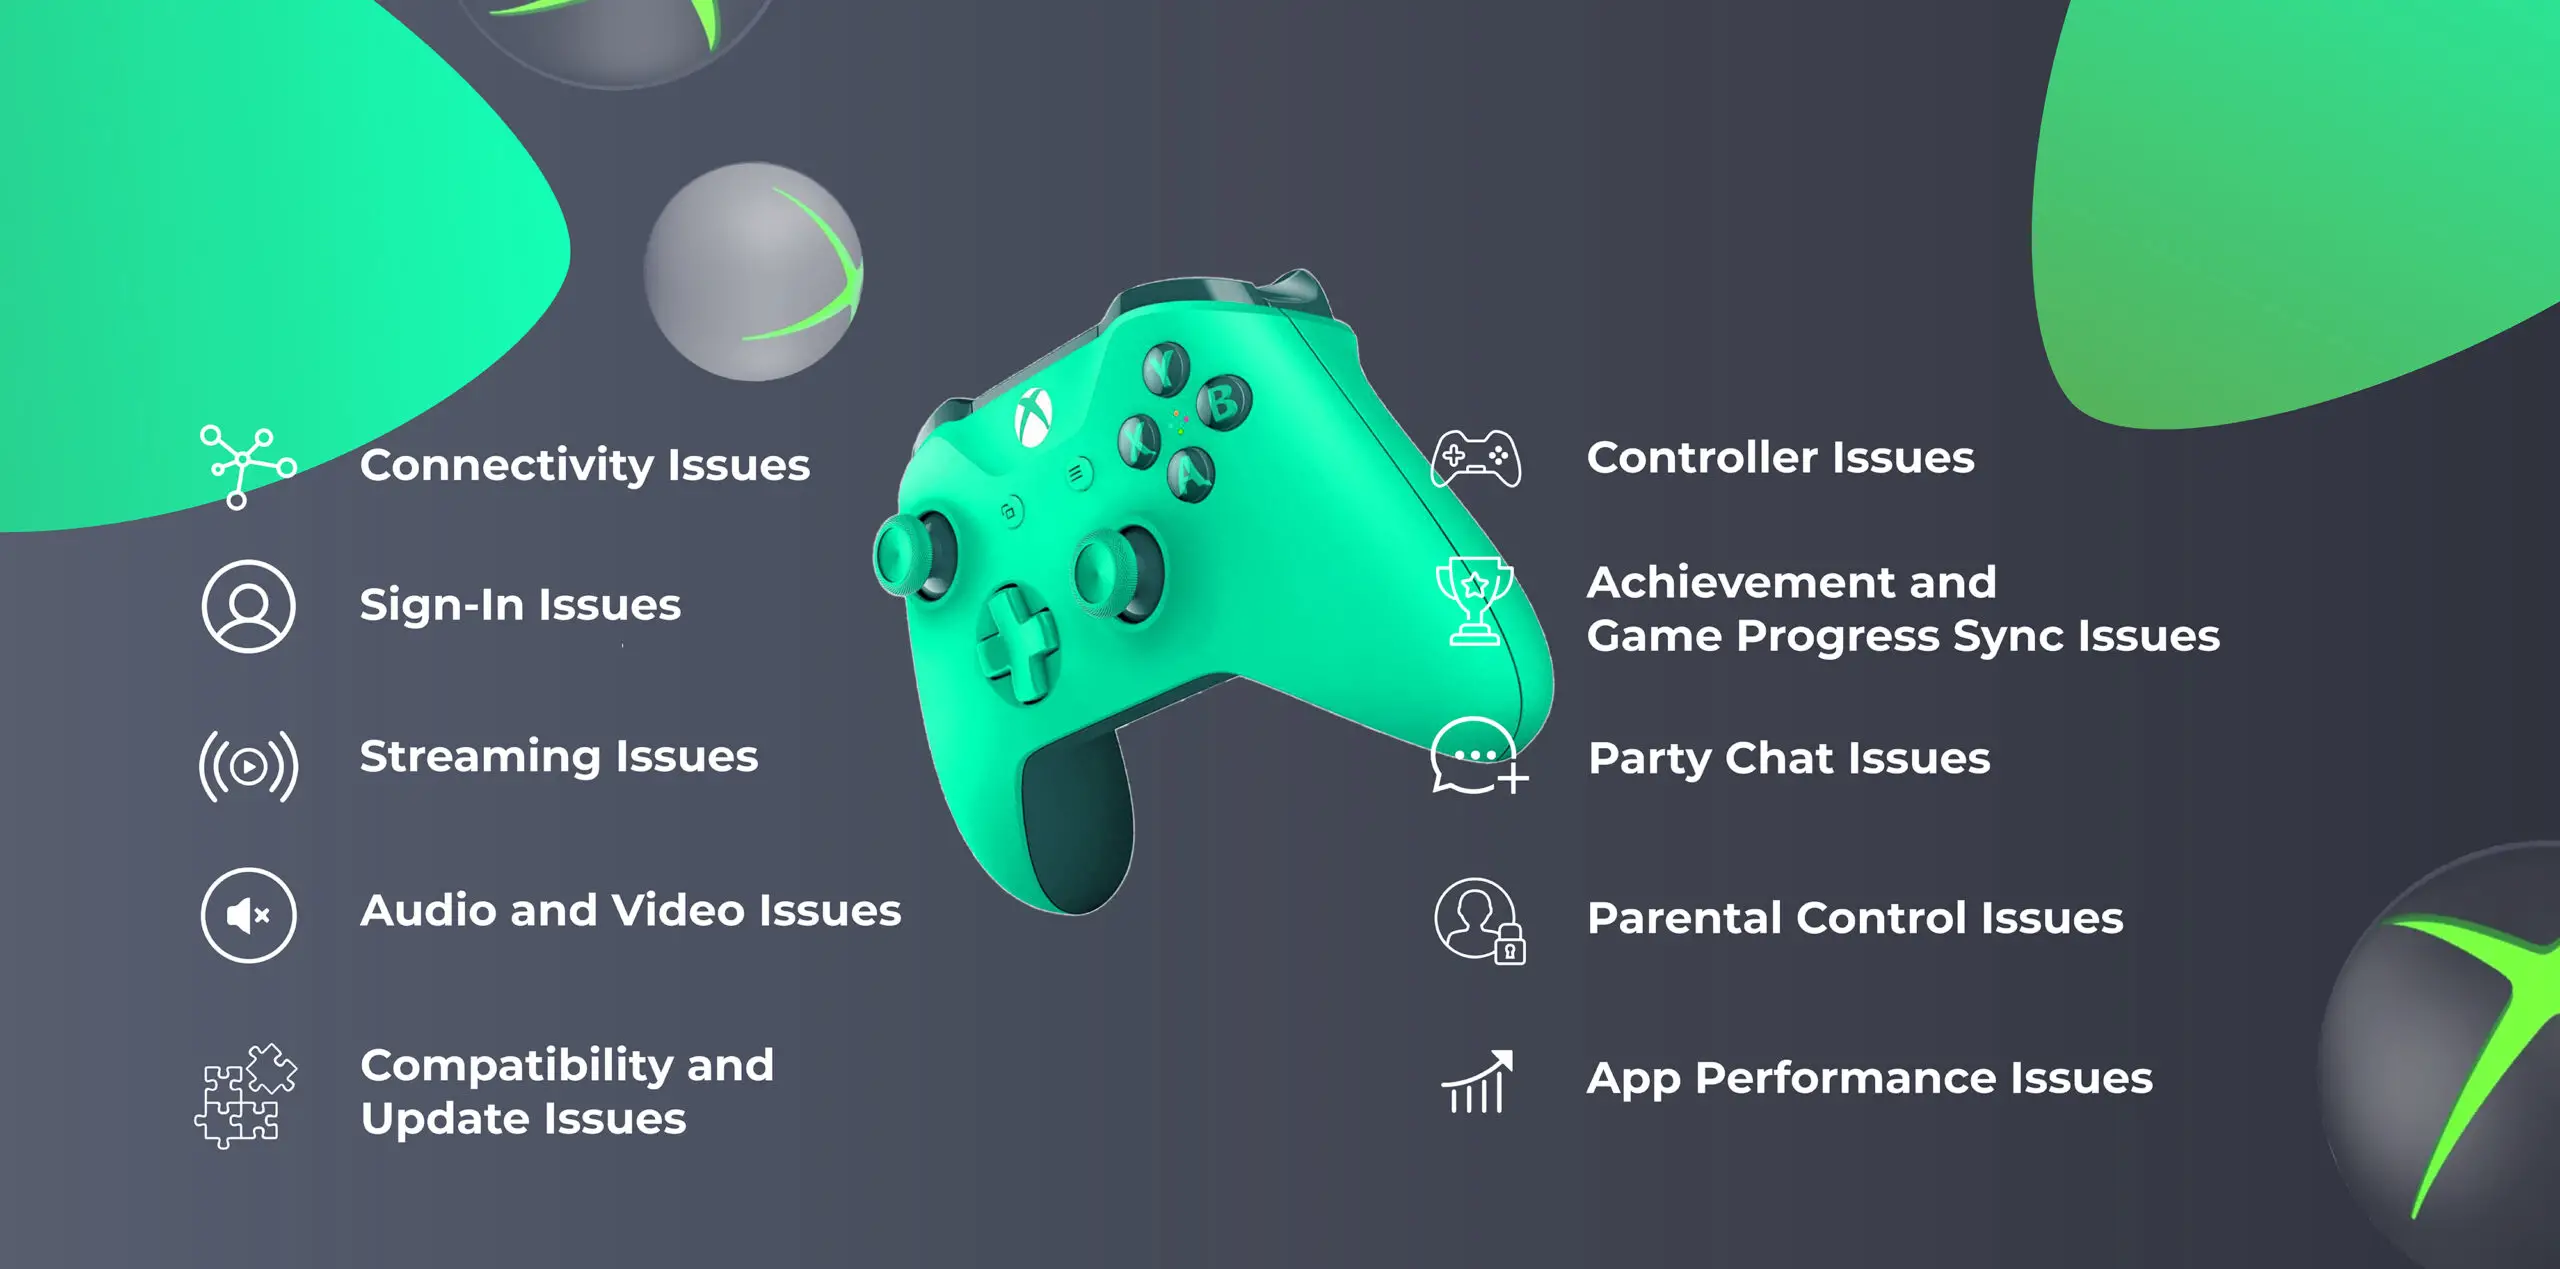 Xbox Companion App Streaming Experience infographic